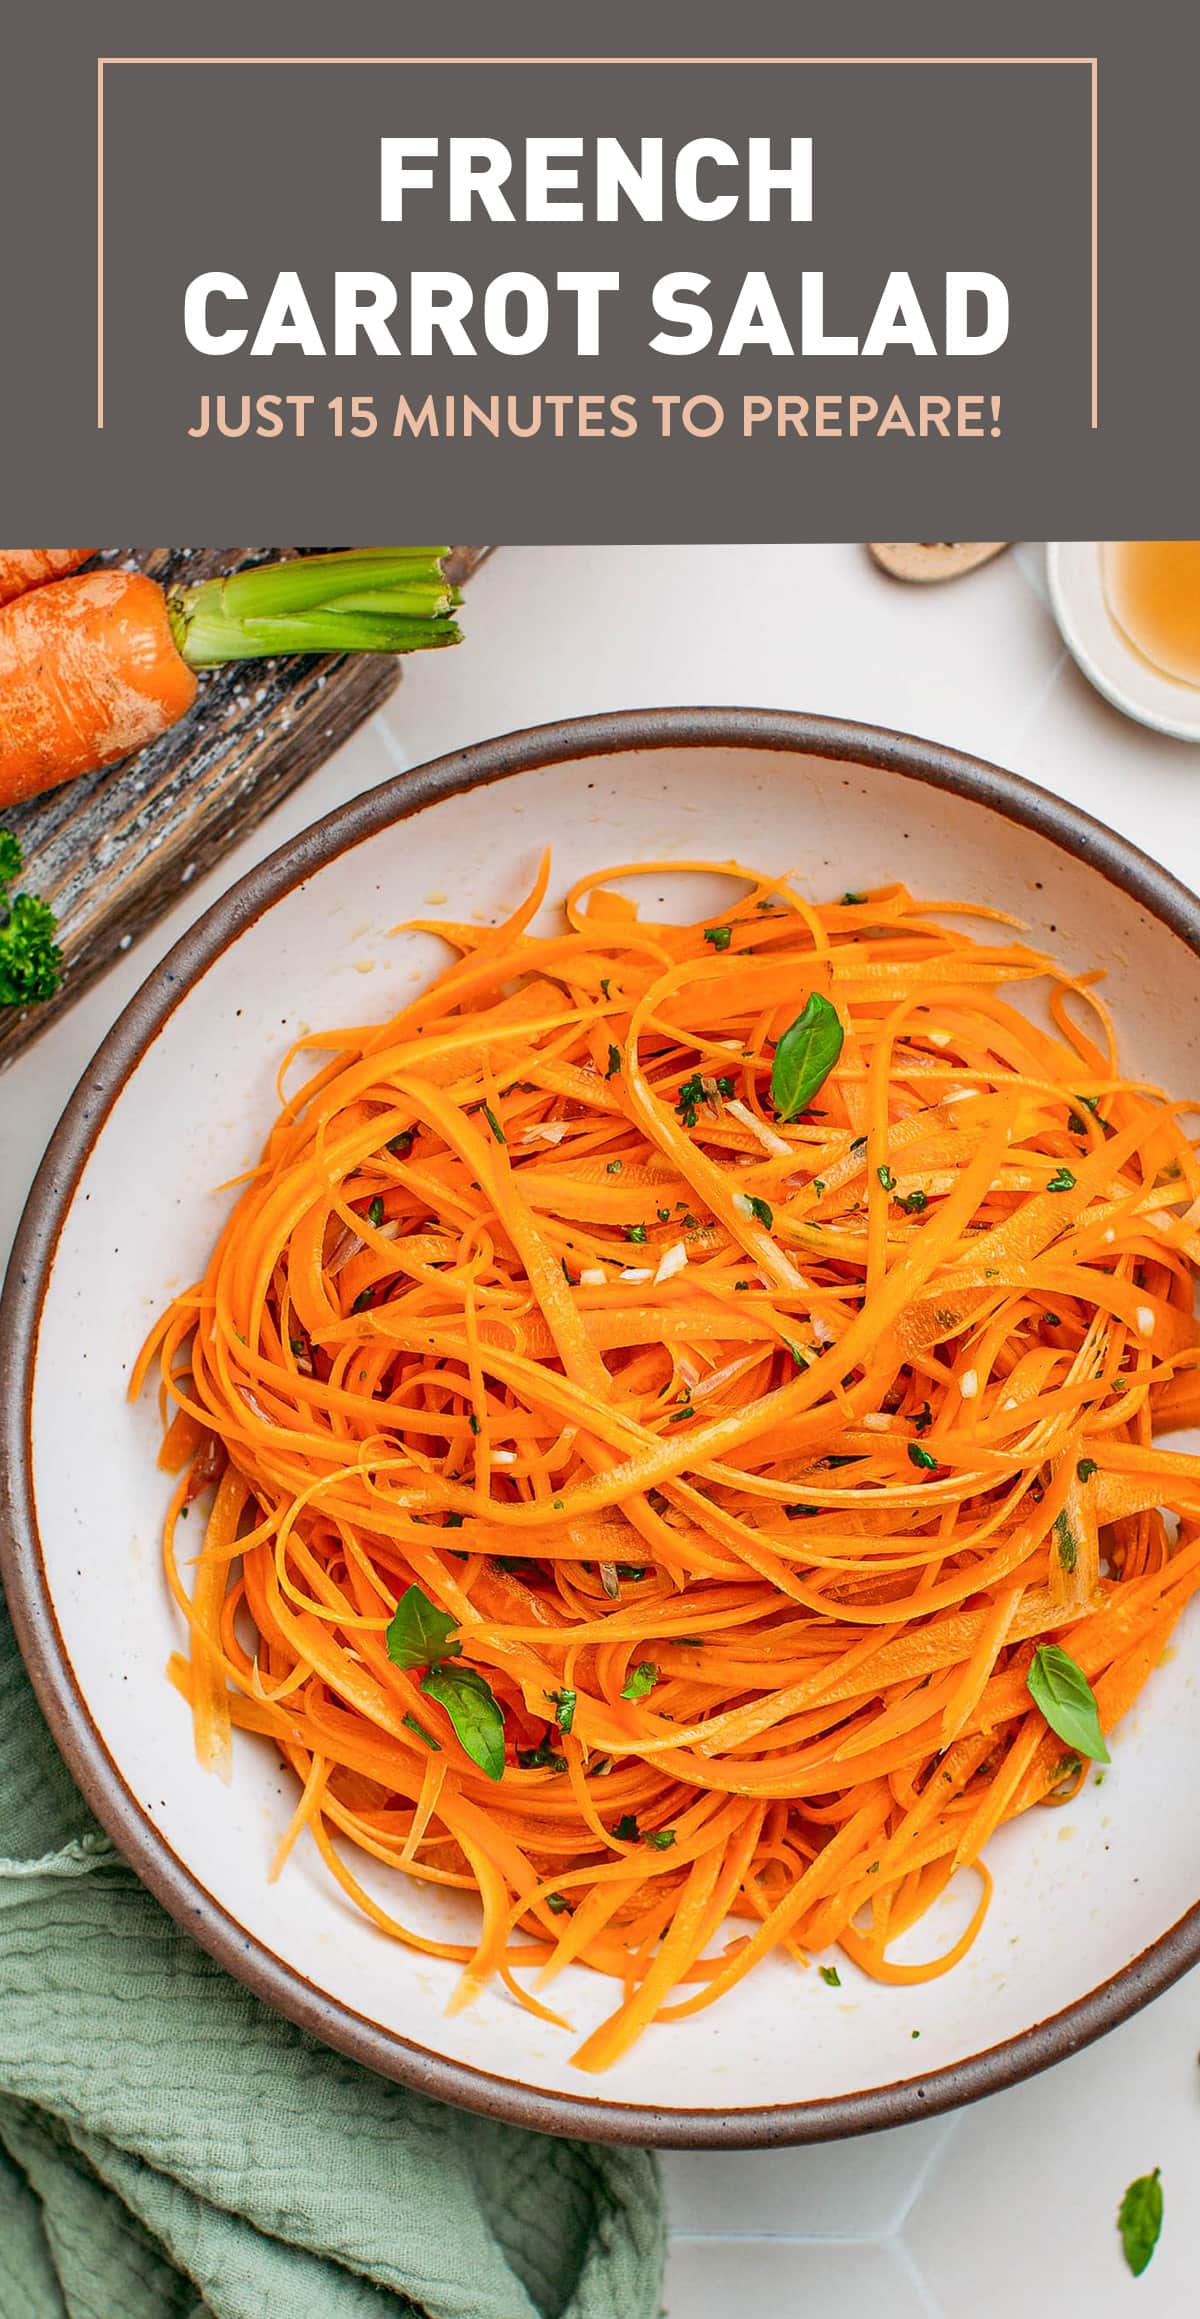 This French-inspired carrot salad is refreshing and healthy, and comes with a bright and tangy lemon dressing! It's a French classic that requires just 10 wholesome ingredients and 15 minutes to prepare! #carrotsalad #salads